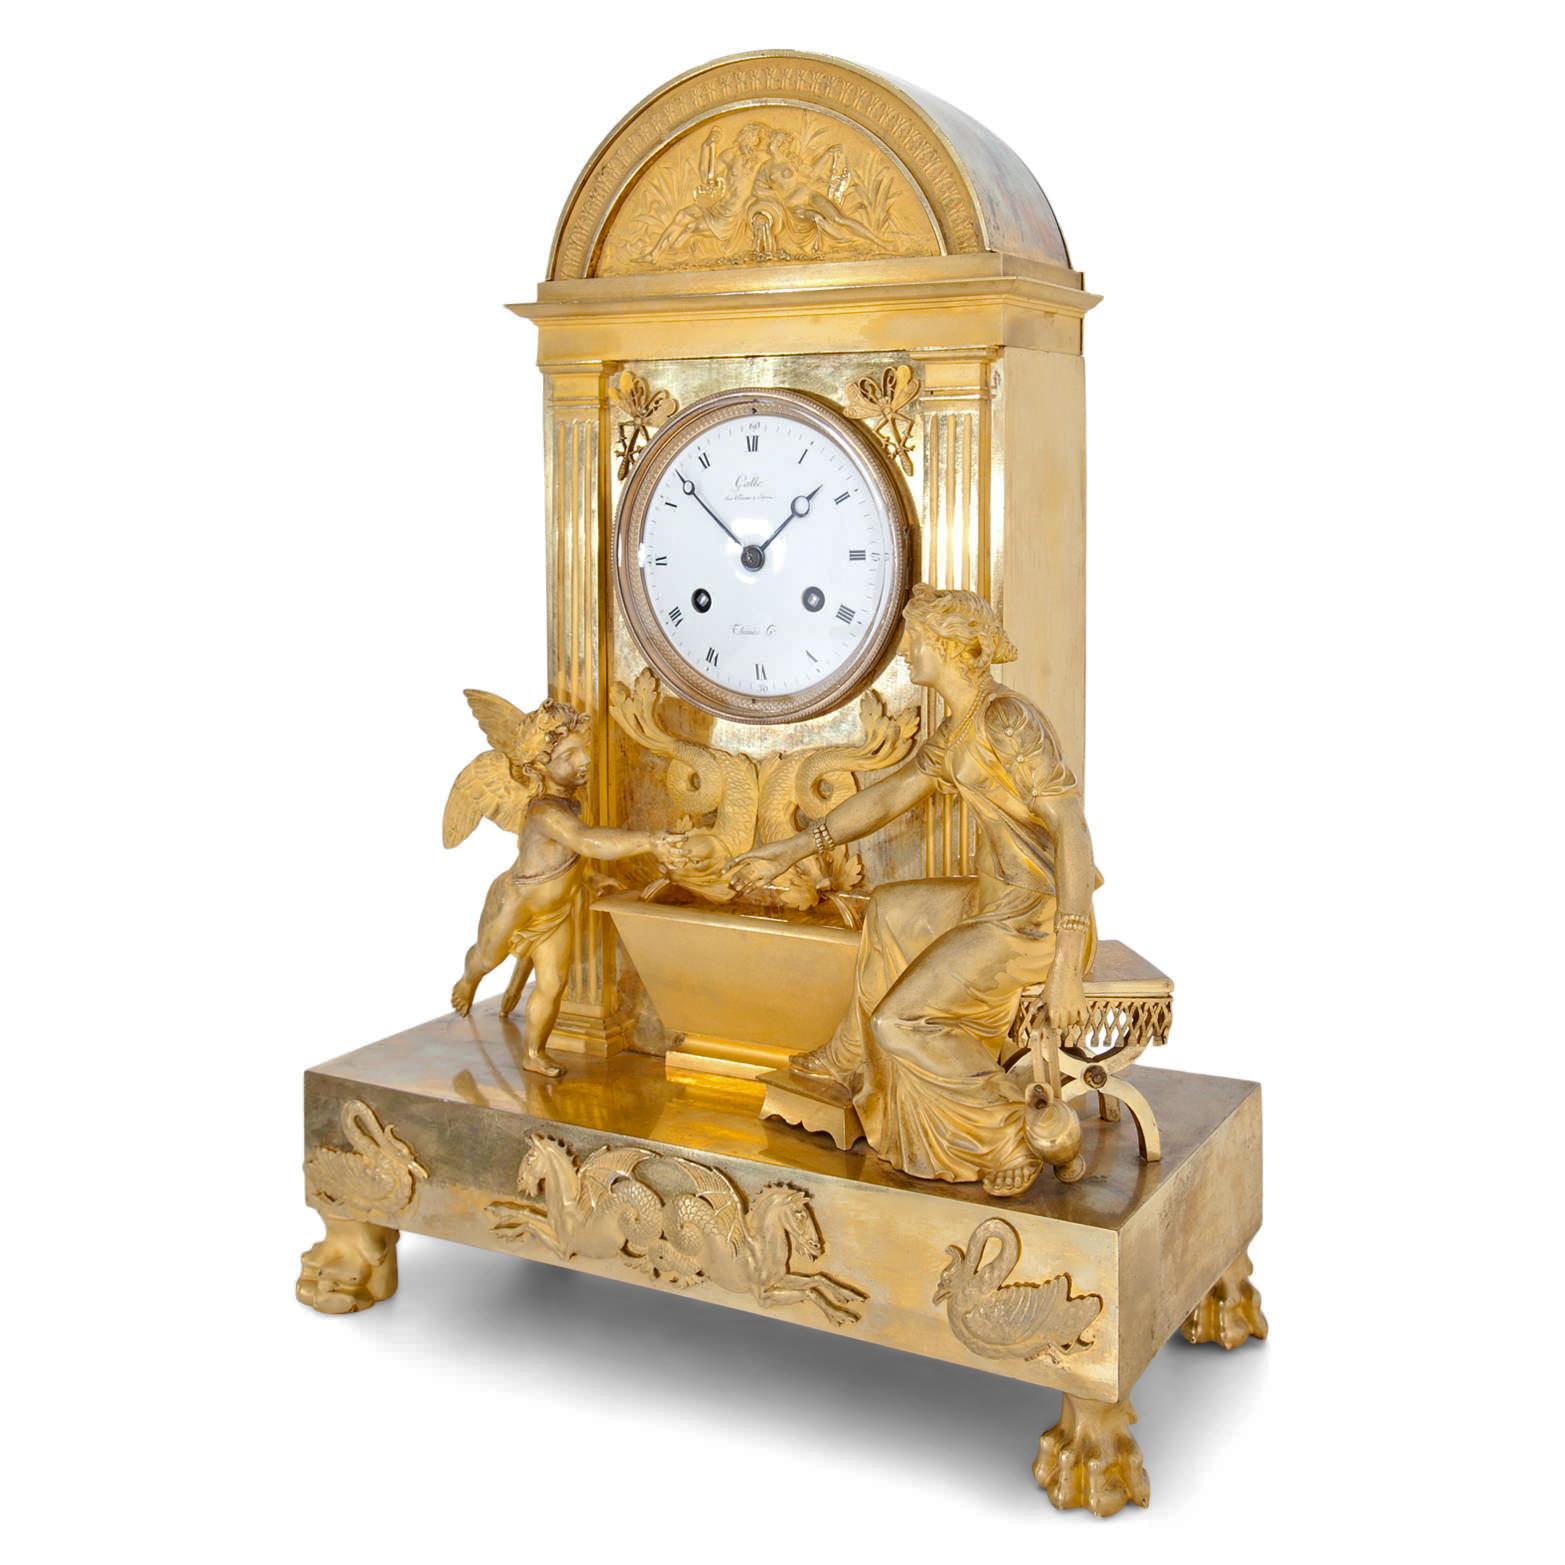 Large mantel clock in a gilt bronze case with an enamel clock face with Roman hours and Arabic minutes. Labeled Gallé, Rue Vivienne à Paris and Thomas. On the rectangular plinth is a figurative depiction of the sitting Venus with Amor, reaching